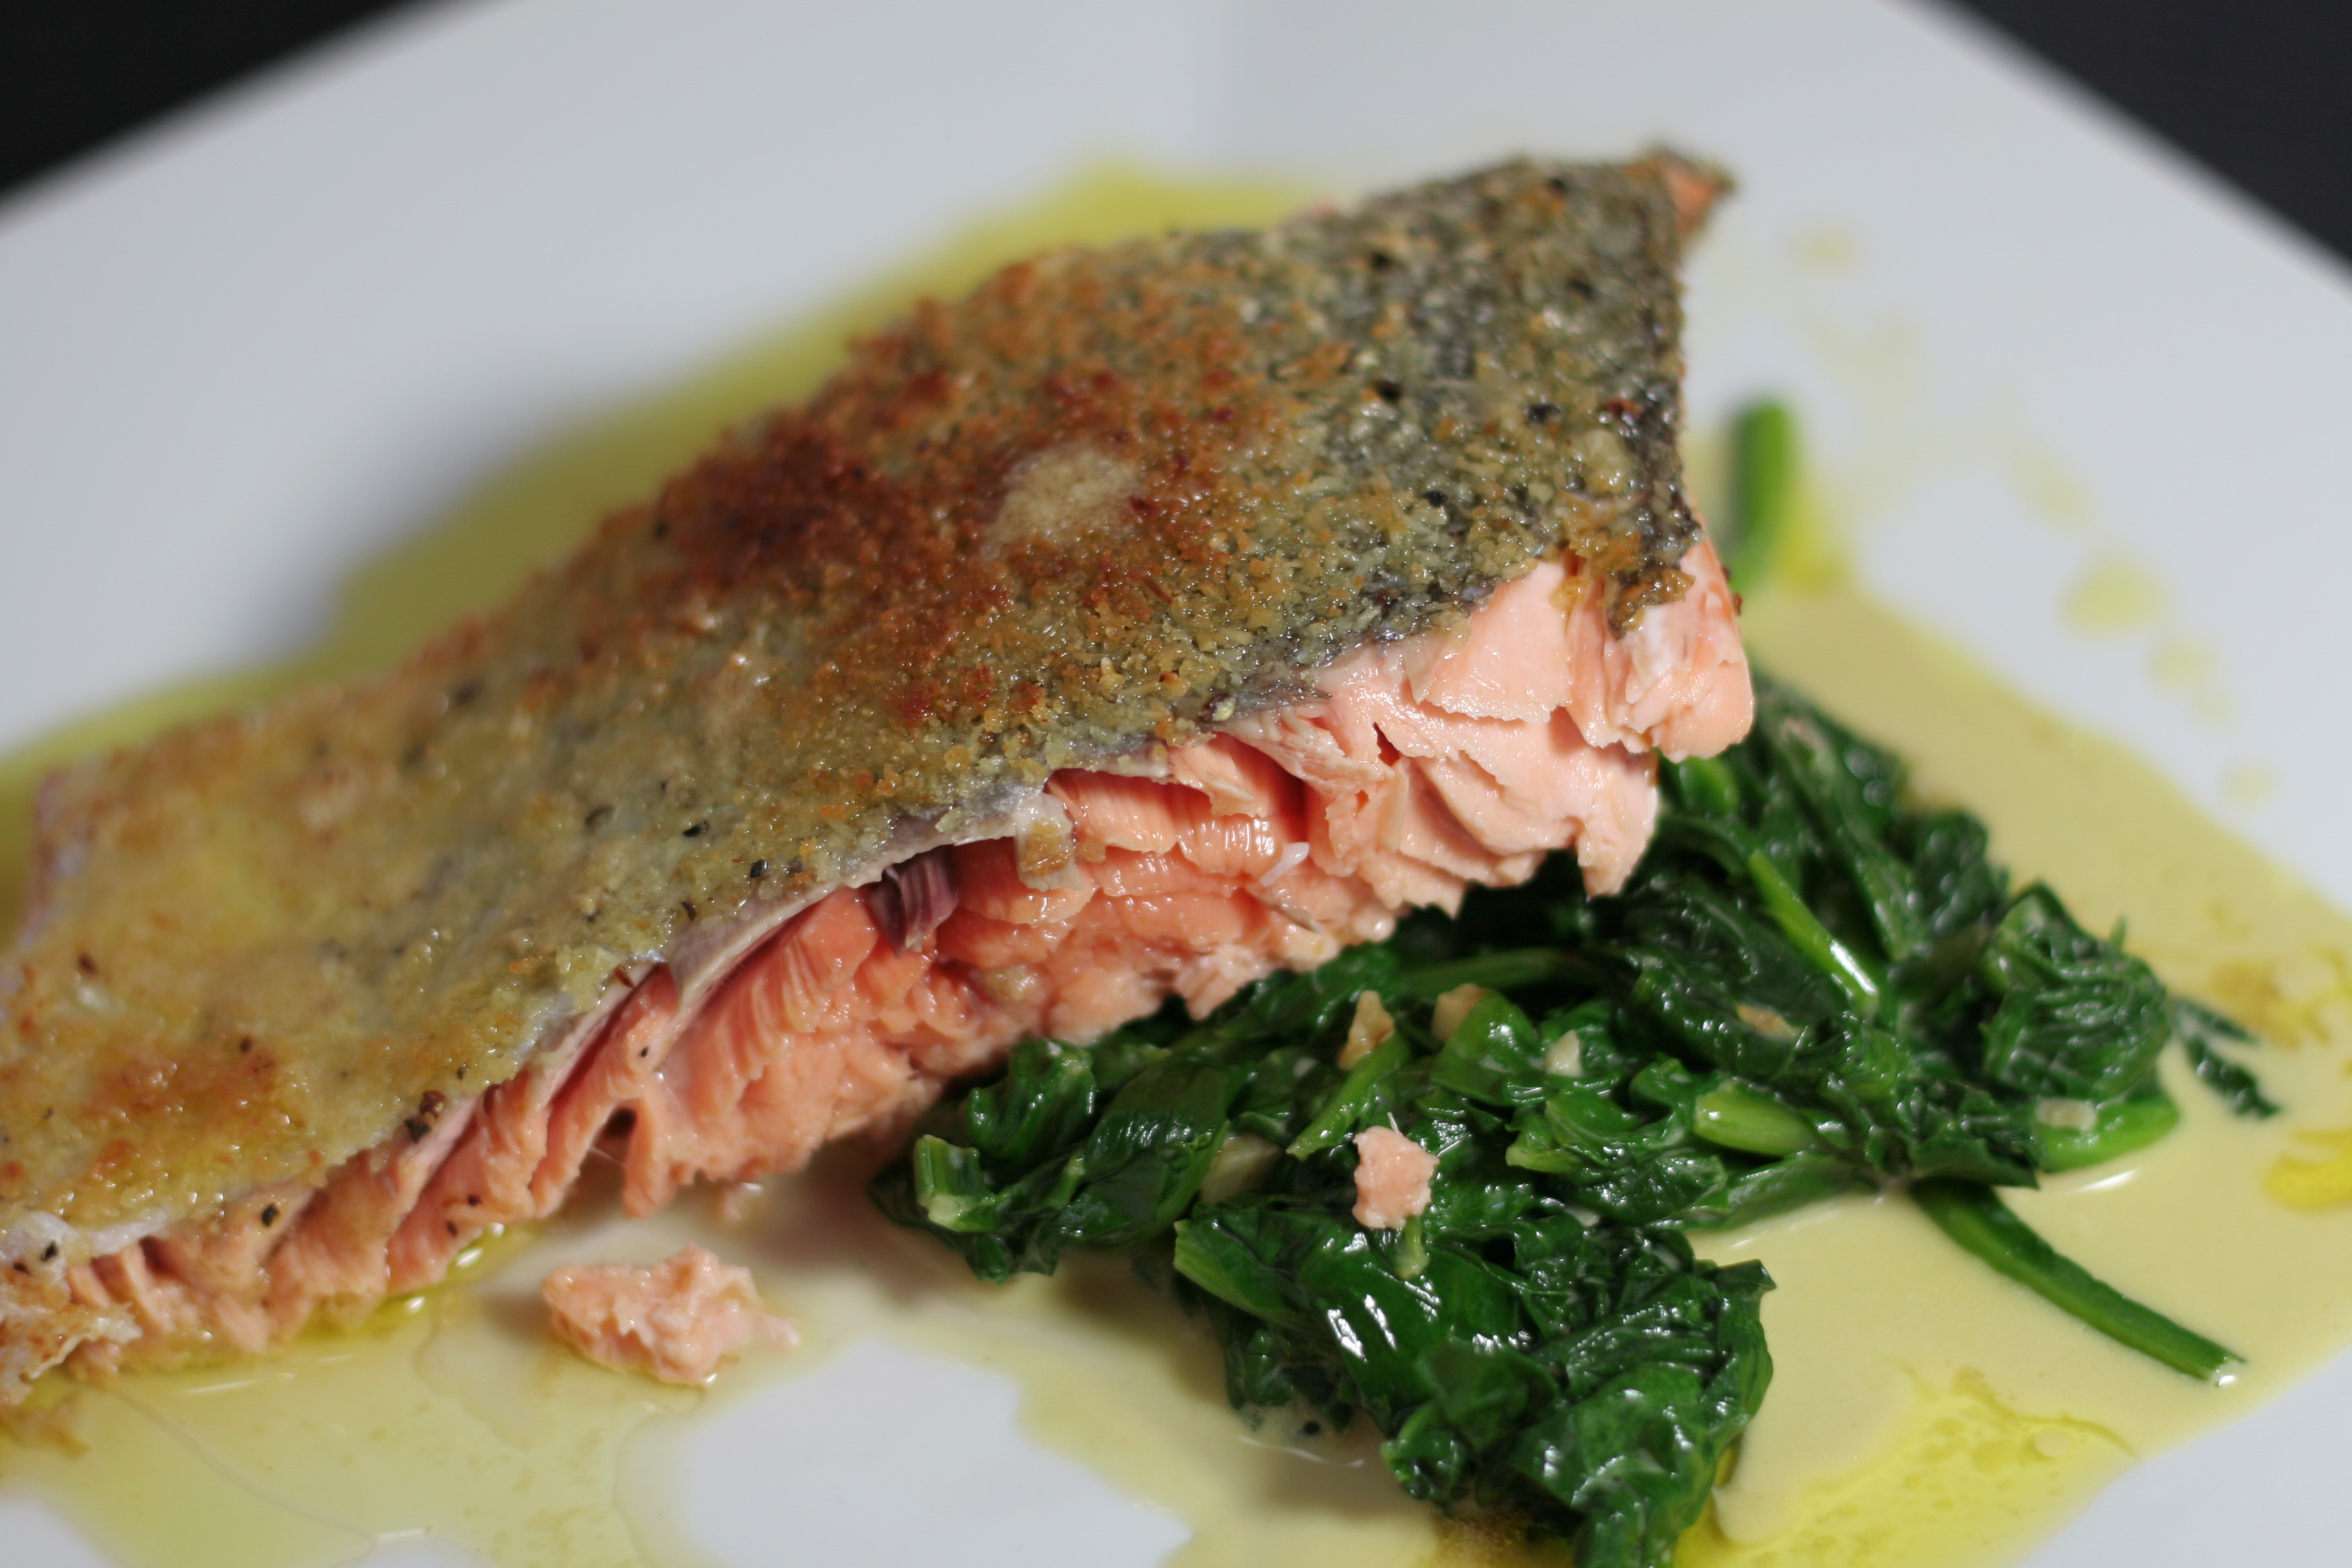 Coconut Crusted Salmon and Creamy Garlic Spinach with Ginger-Maple Butter